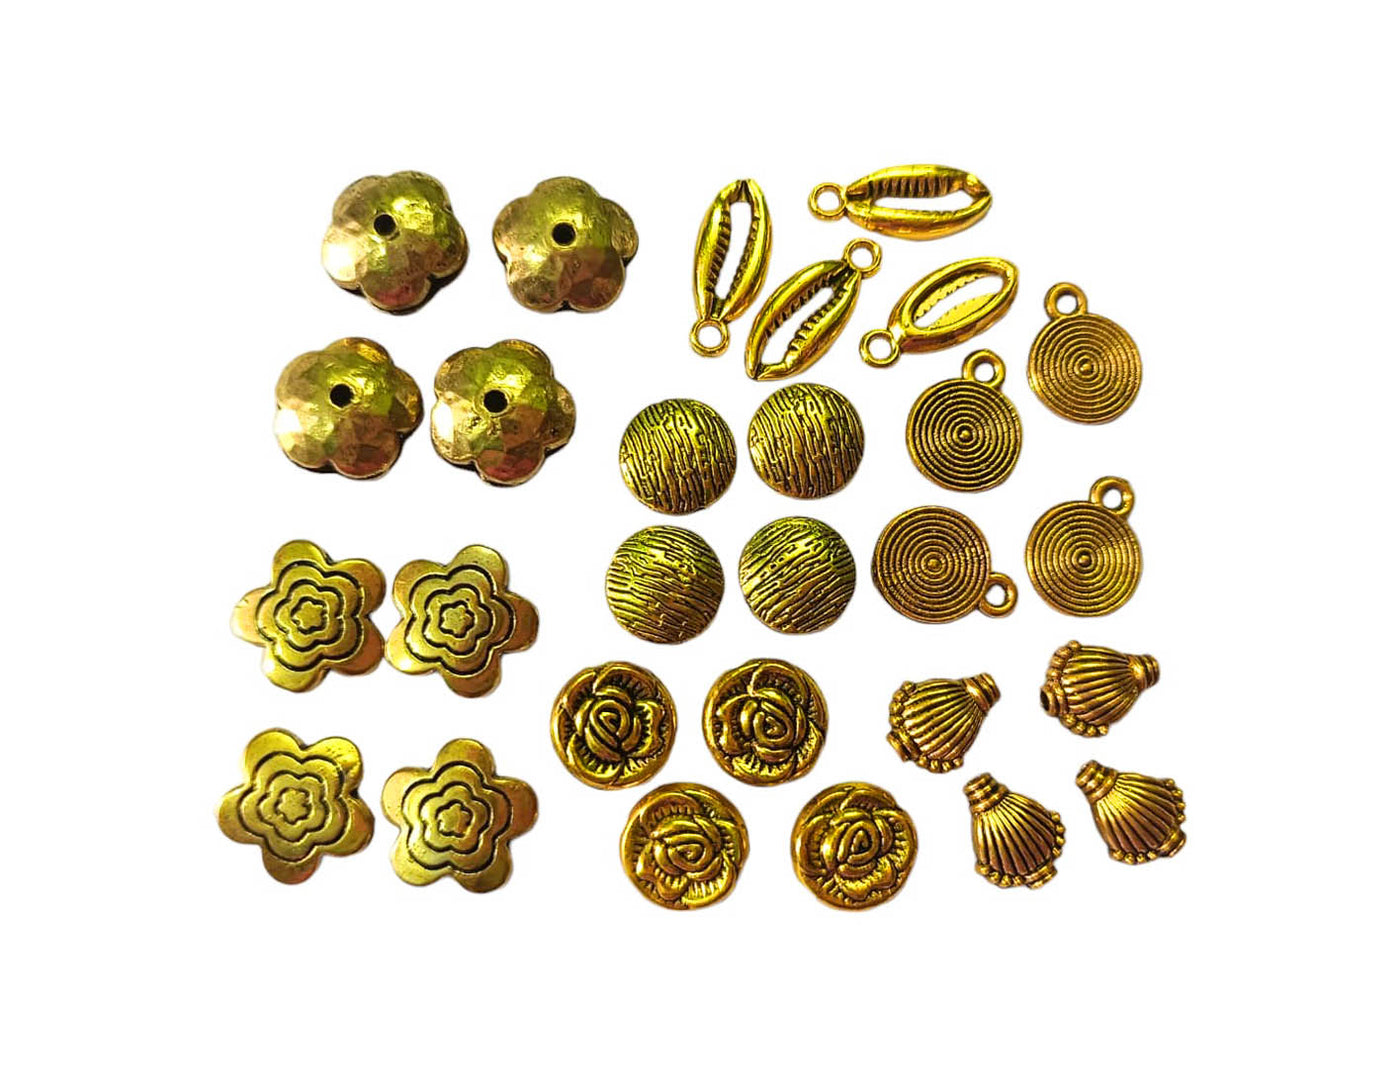 Antique Golden Metal Beads & Charms Combo